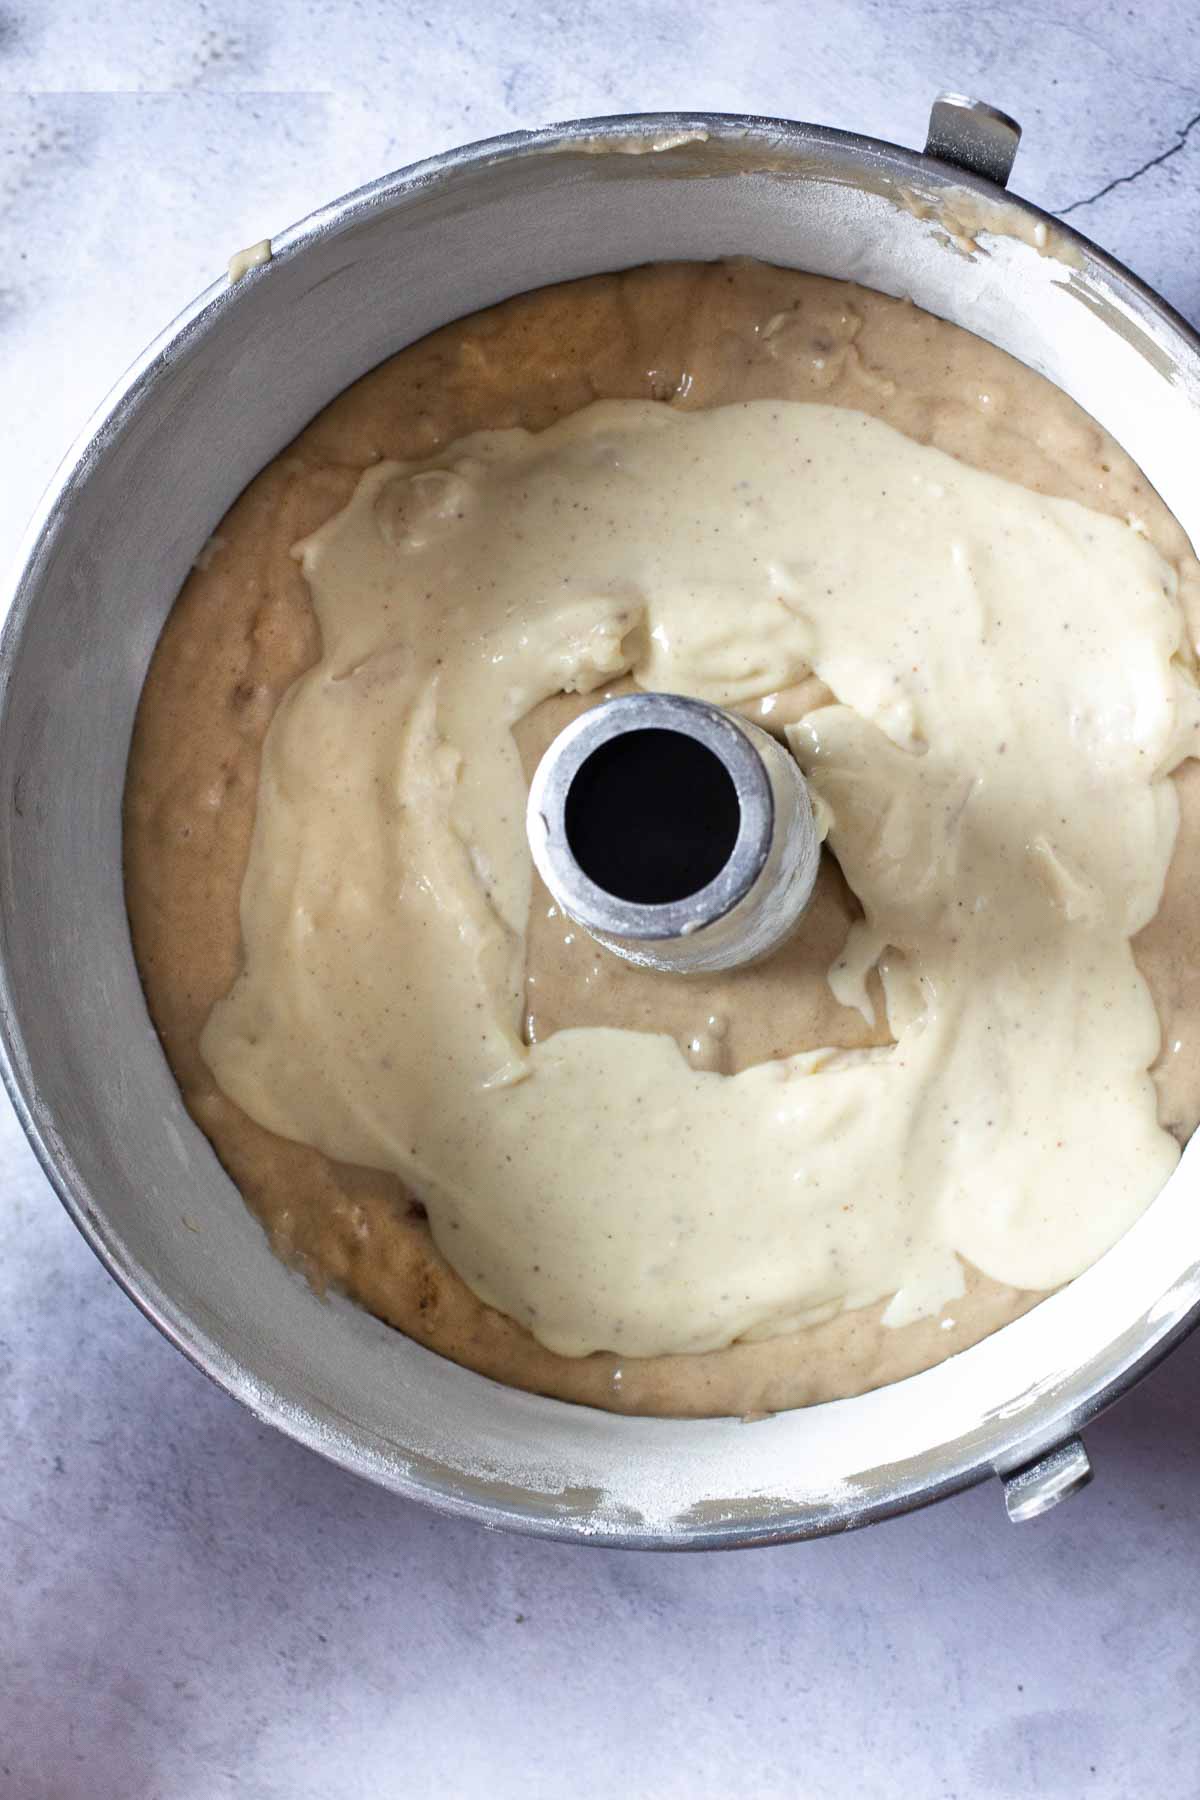 Placing a layer of cream cheese filling in banana coffee cake batter.